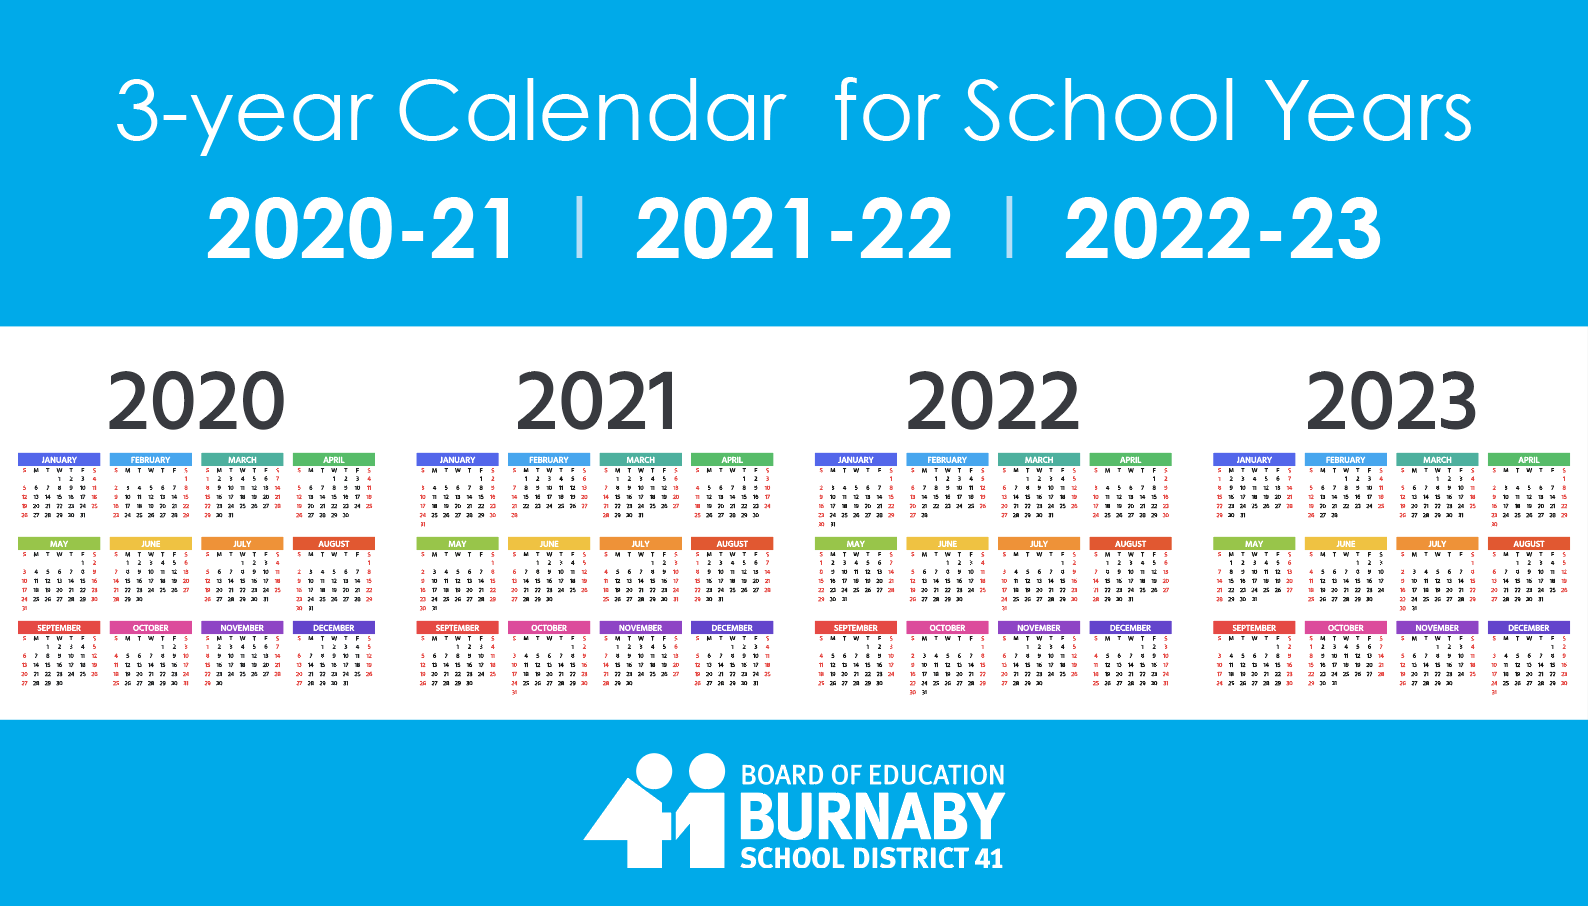 3yearCalendar_20191202 at 1.12.44 PM Burnaby Schools